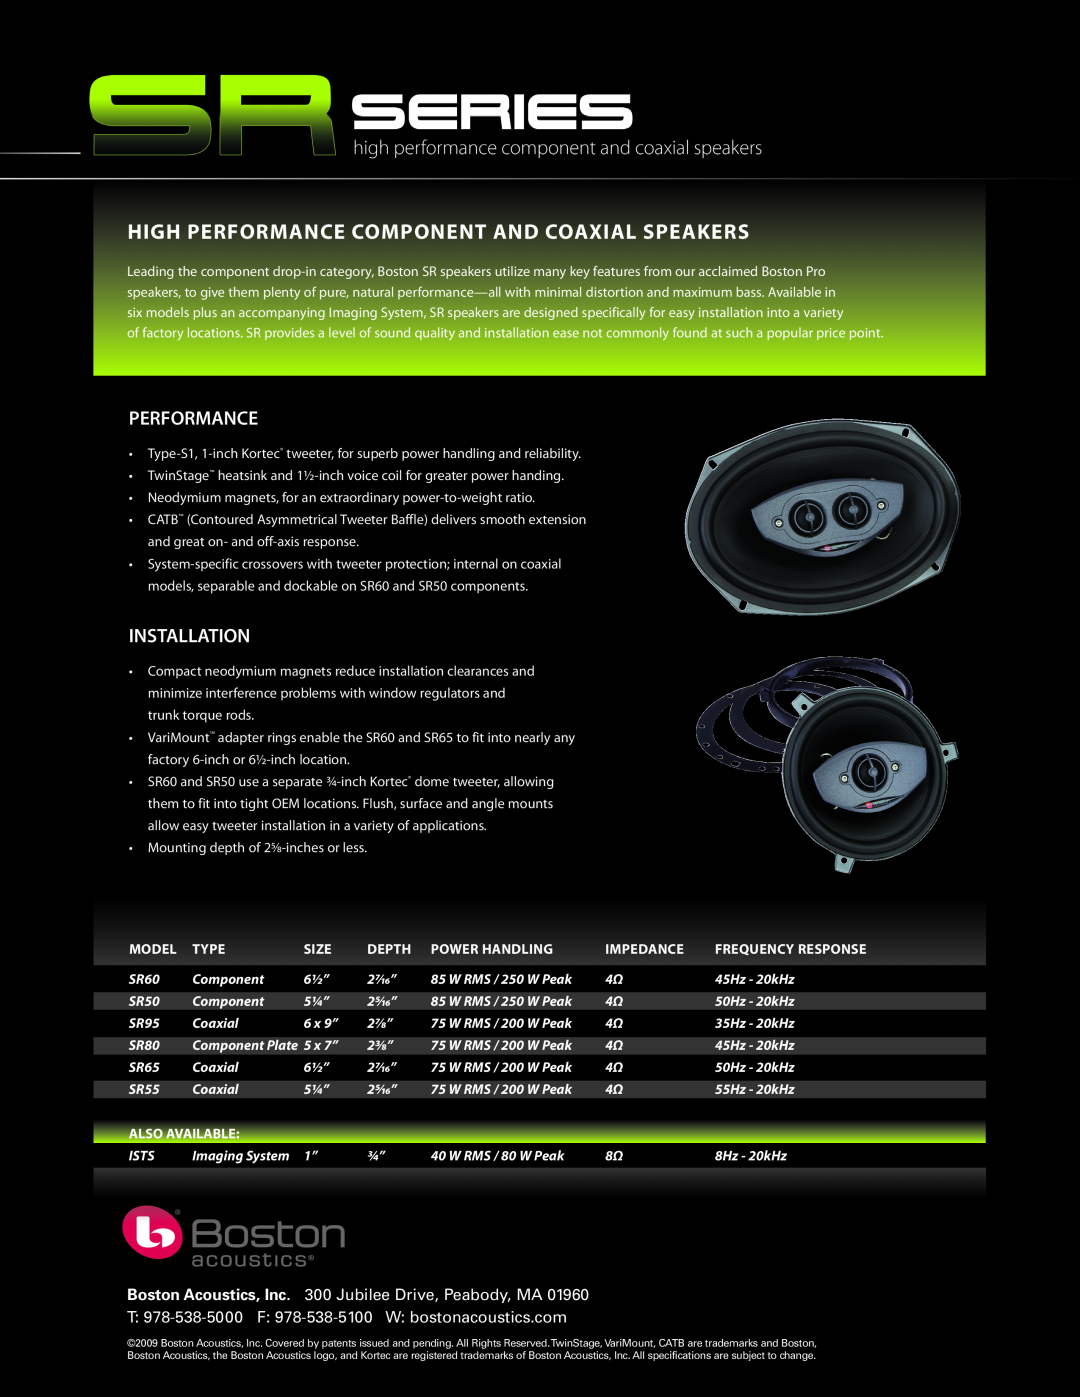 Boston Acoustics SR95 High Performance Component And Coaxial Speakers, Installation, Model, Type, Size, Depth, Impedance 